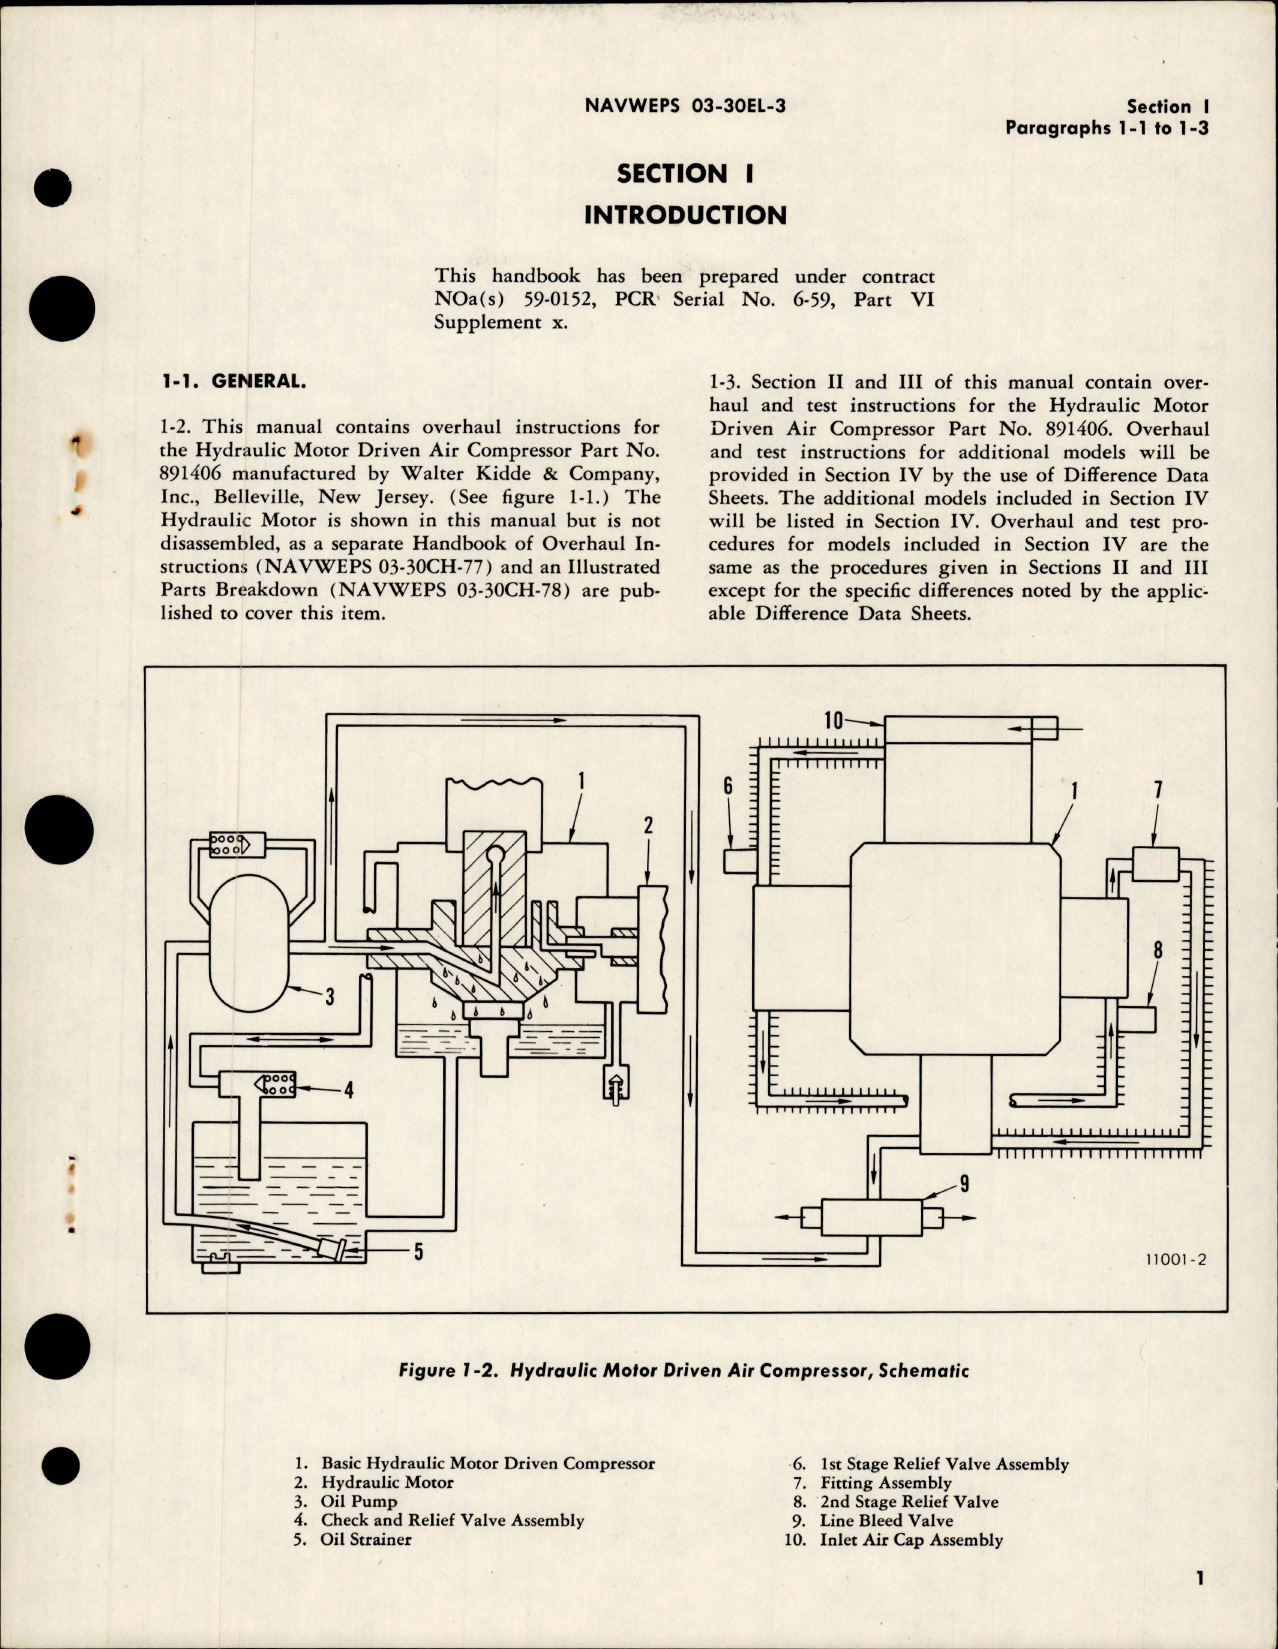 Sample page 5 from AirCorps Library document: Overhaul Instructions for Hydraulic Motor Driven Air Compressor - 891406 